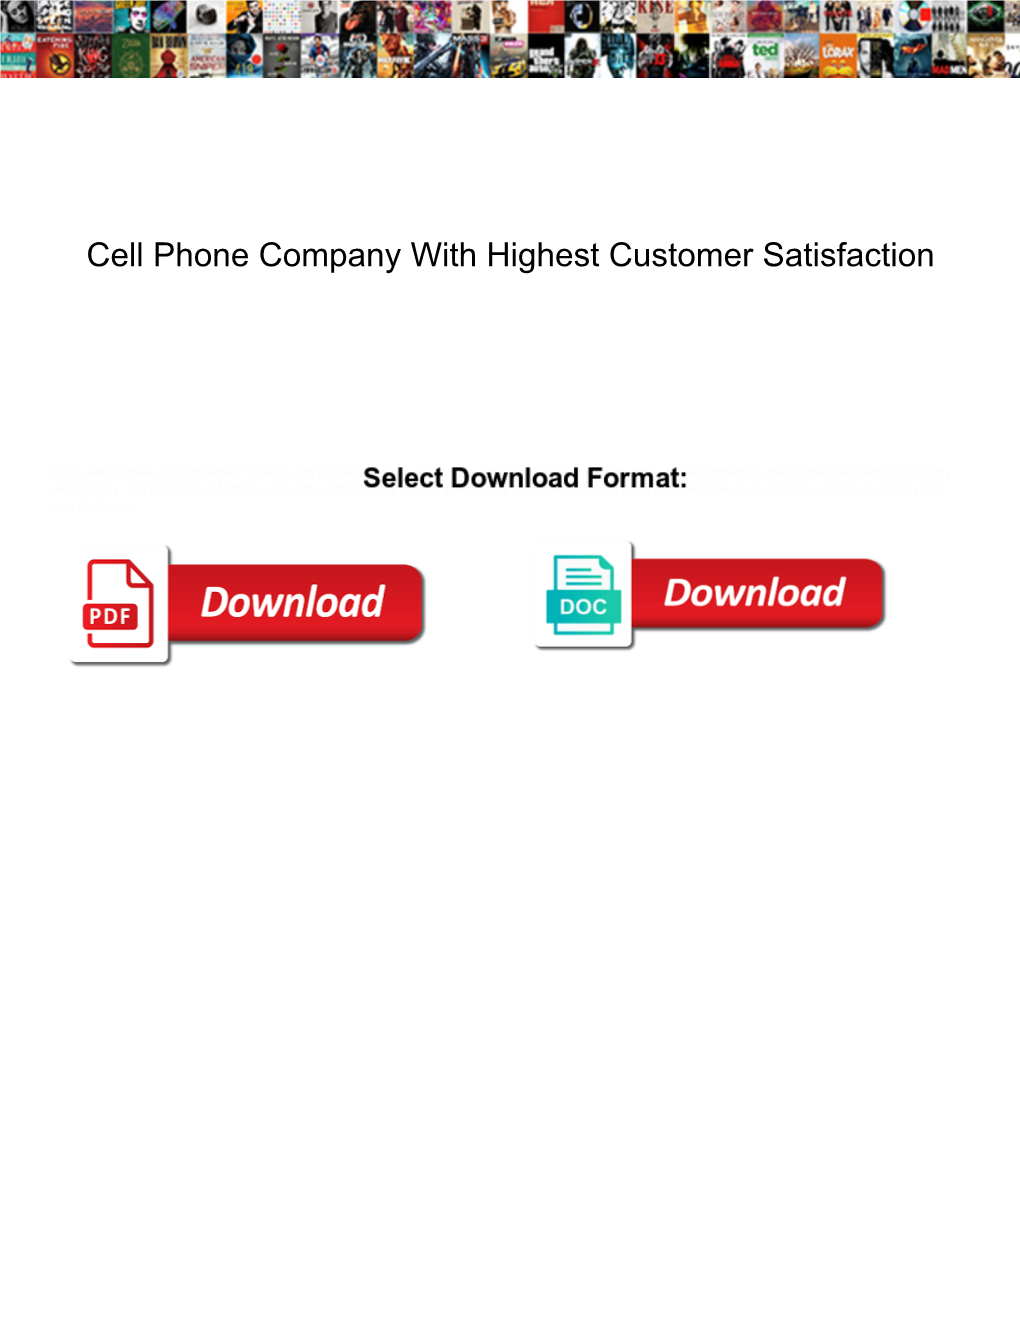 Cell Phone Company with Highest Customer Satisfaction